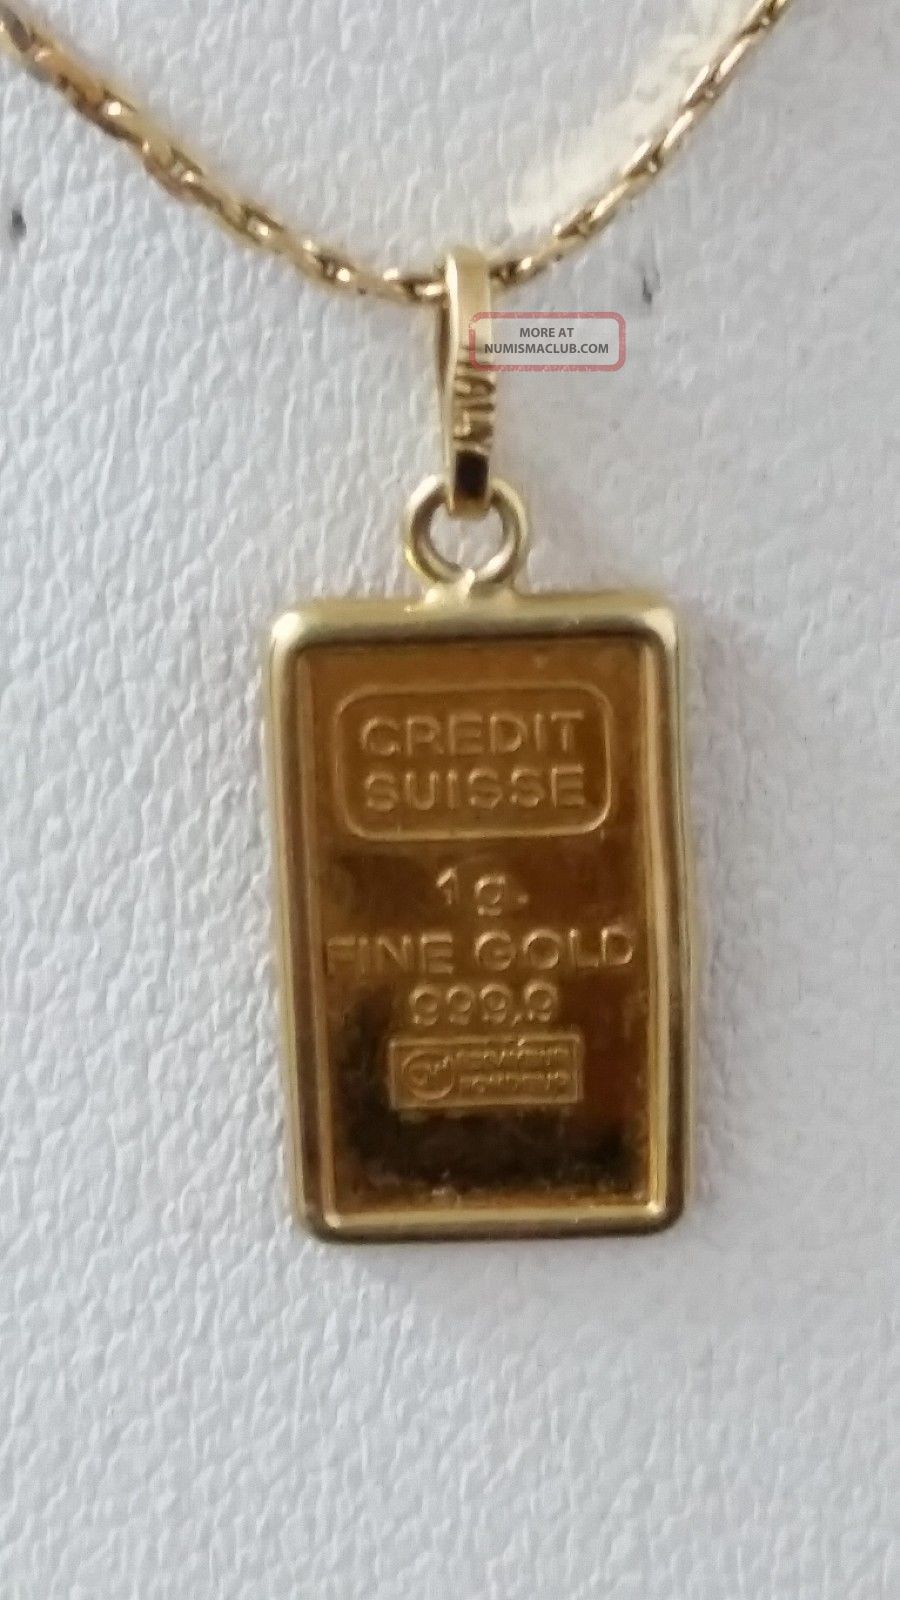 how big can a credit suisse gold bar be